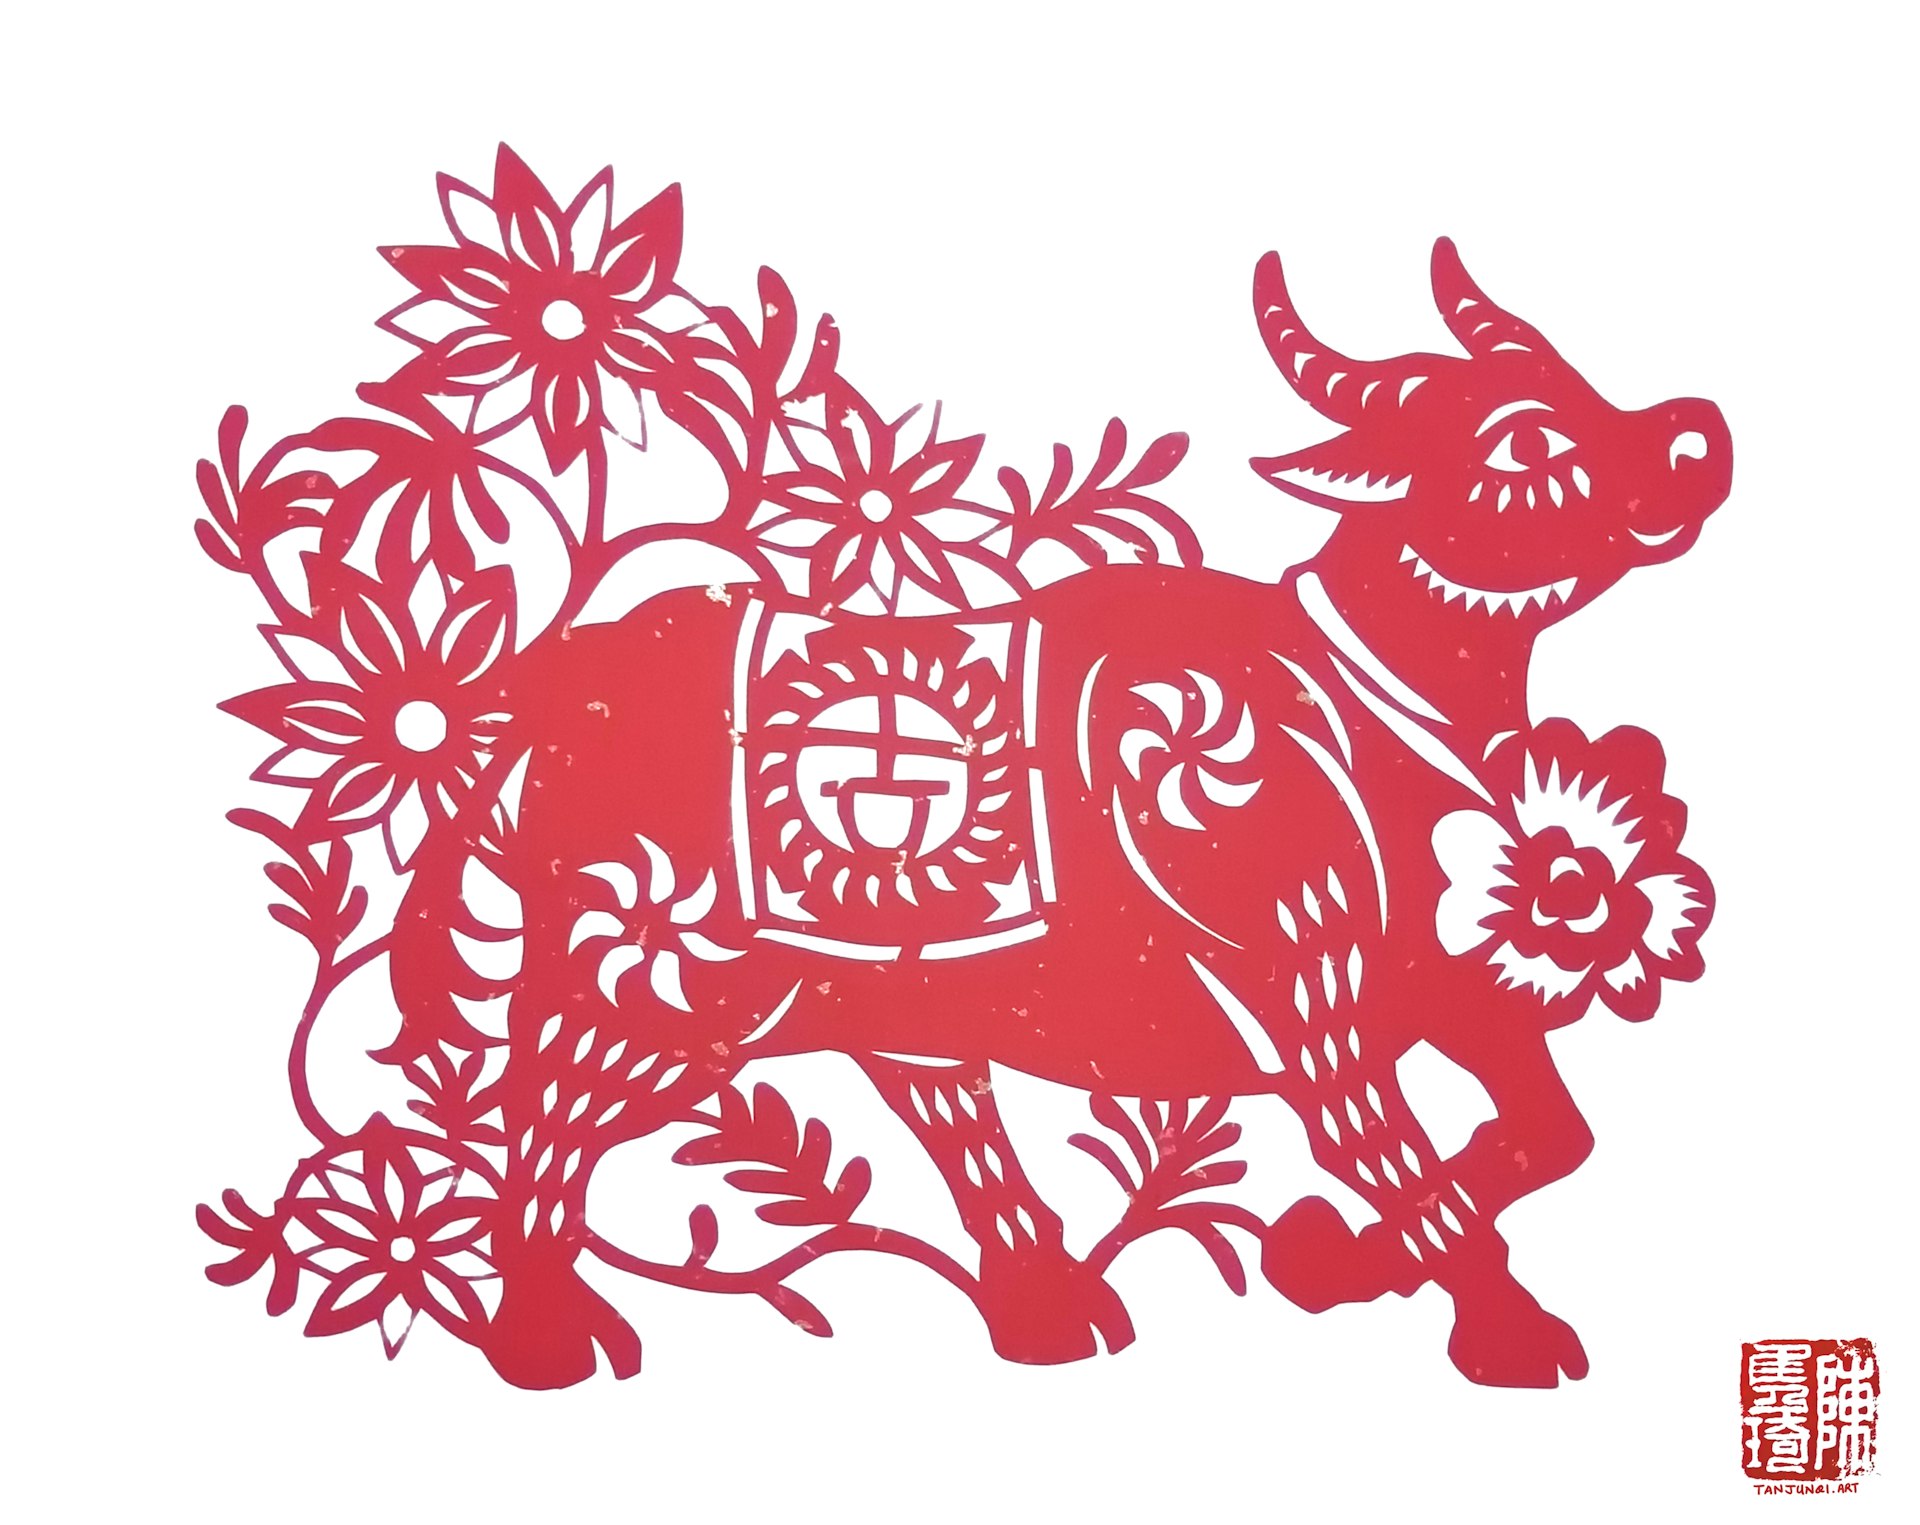 Chinese papercut of a bull with a large flower around its neck, and a saddle with the Chinese word for 'lucky' as it proudly walks towards the right amidst blooming floweres.